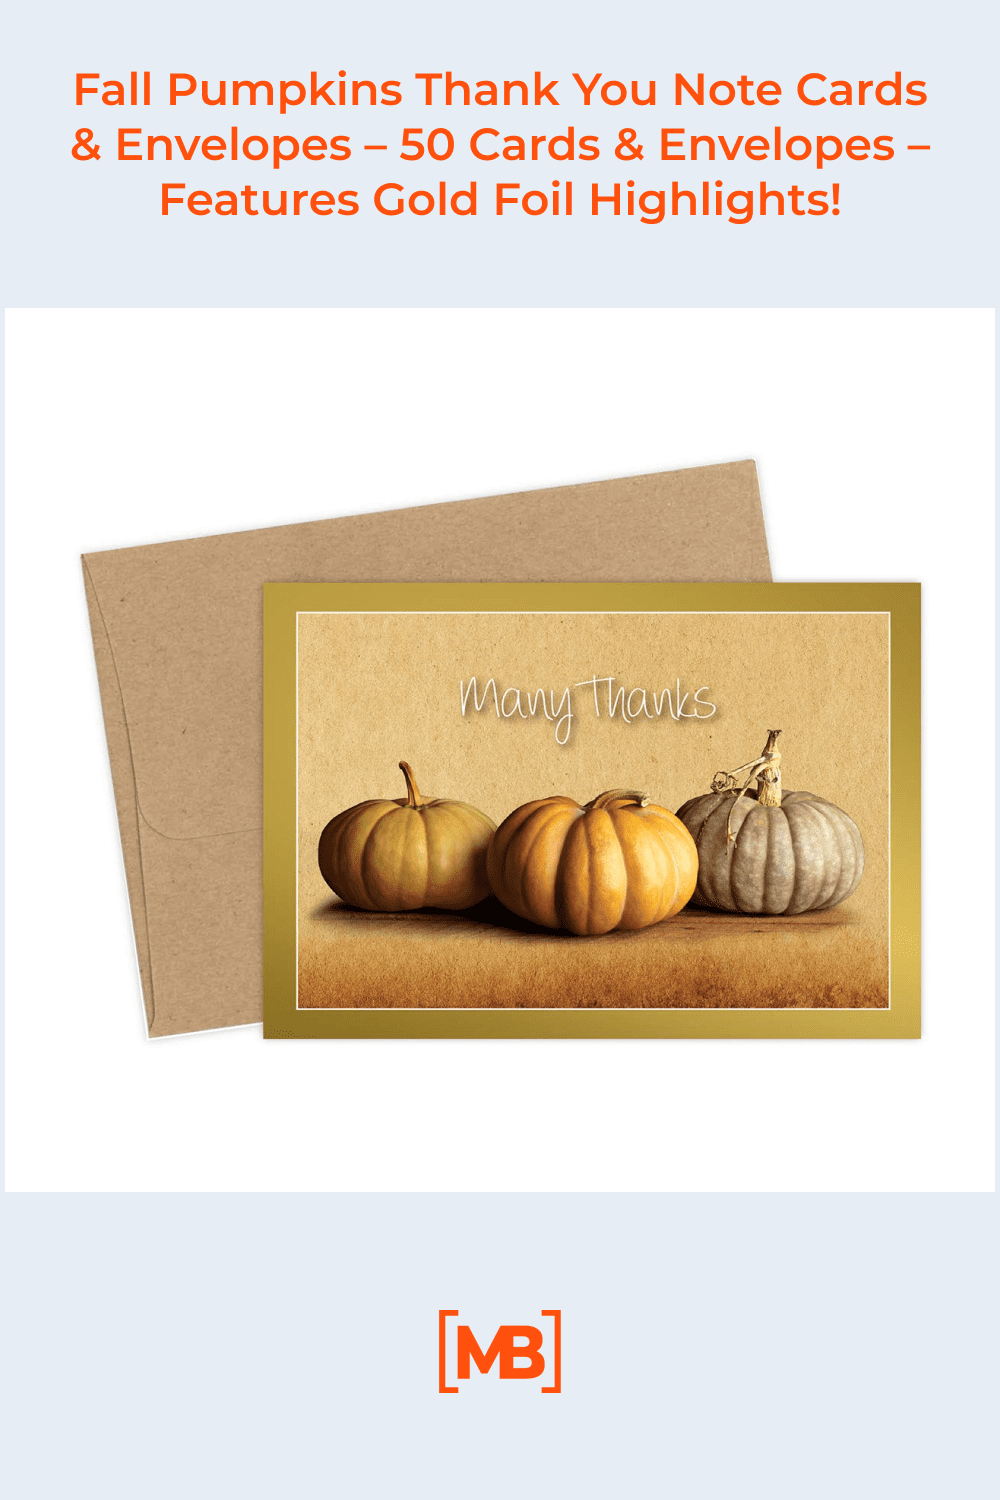 Fall pumpkins thank you note cards and envelopes - features gold foil highlights.